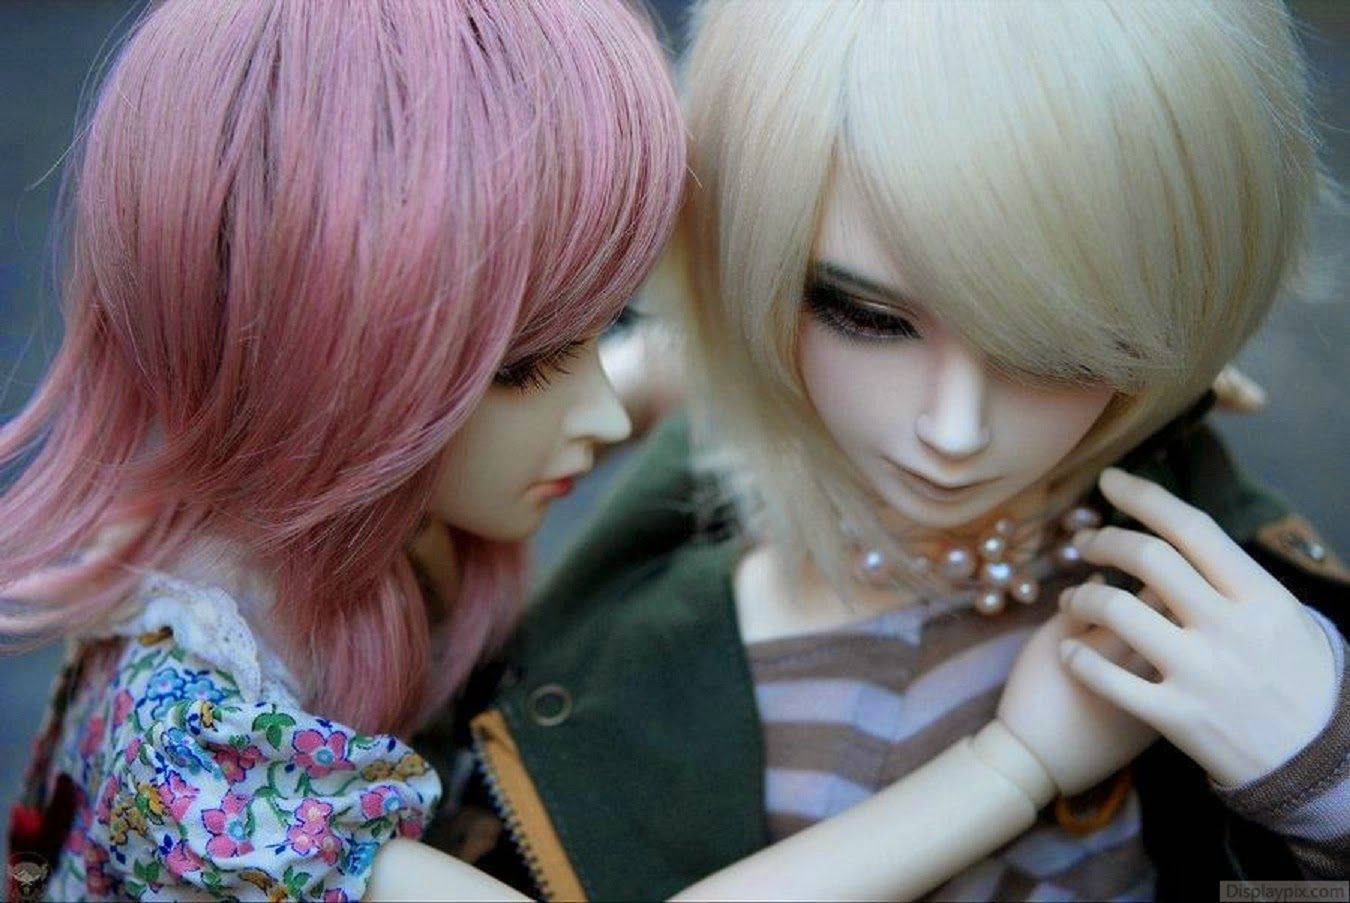 doll couple wallpaper,hair,doll,people,wig,hair coloring